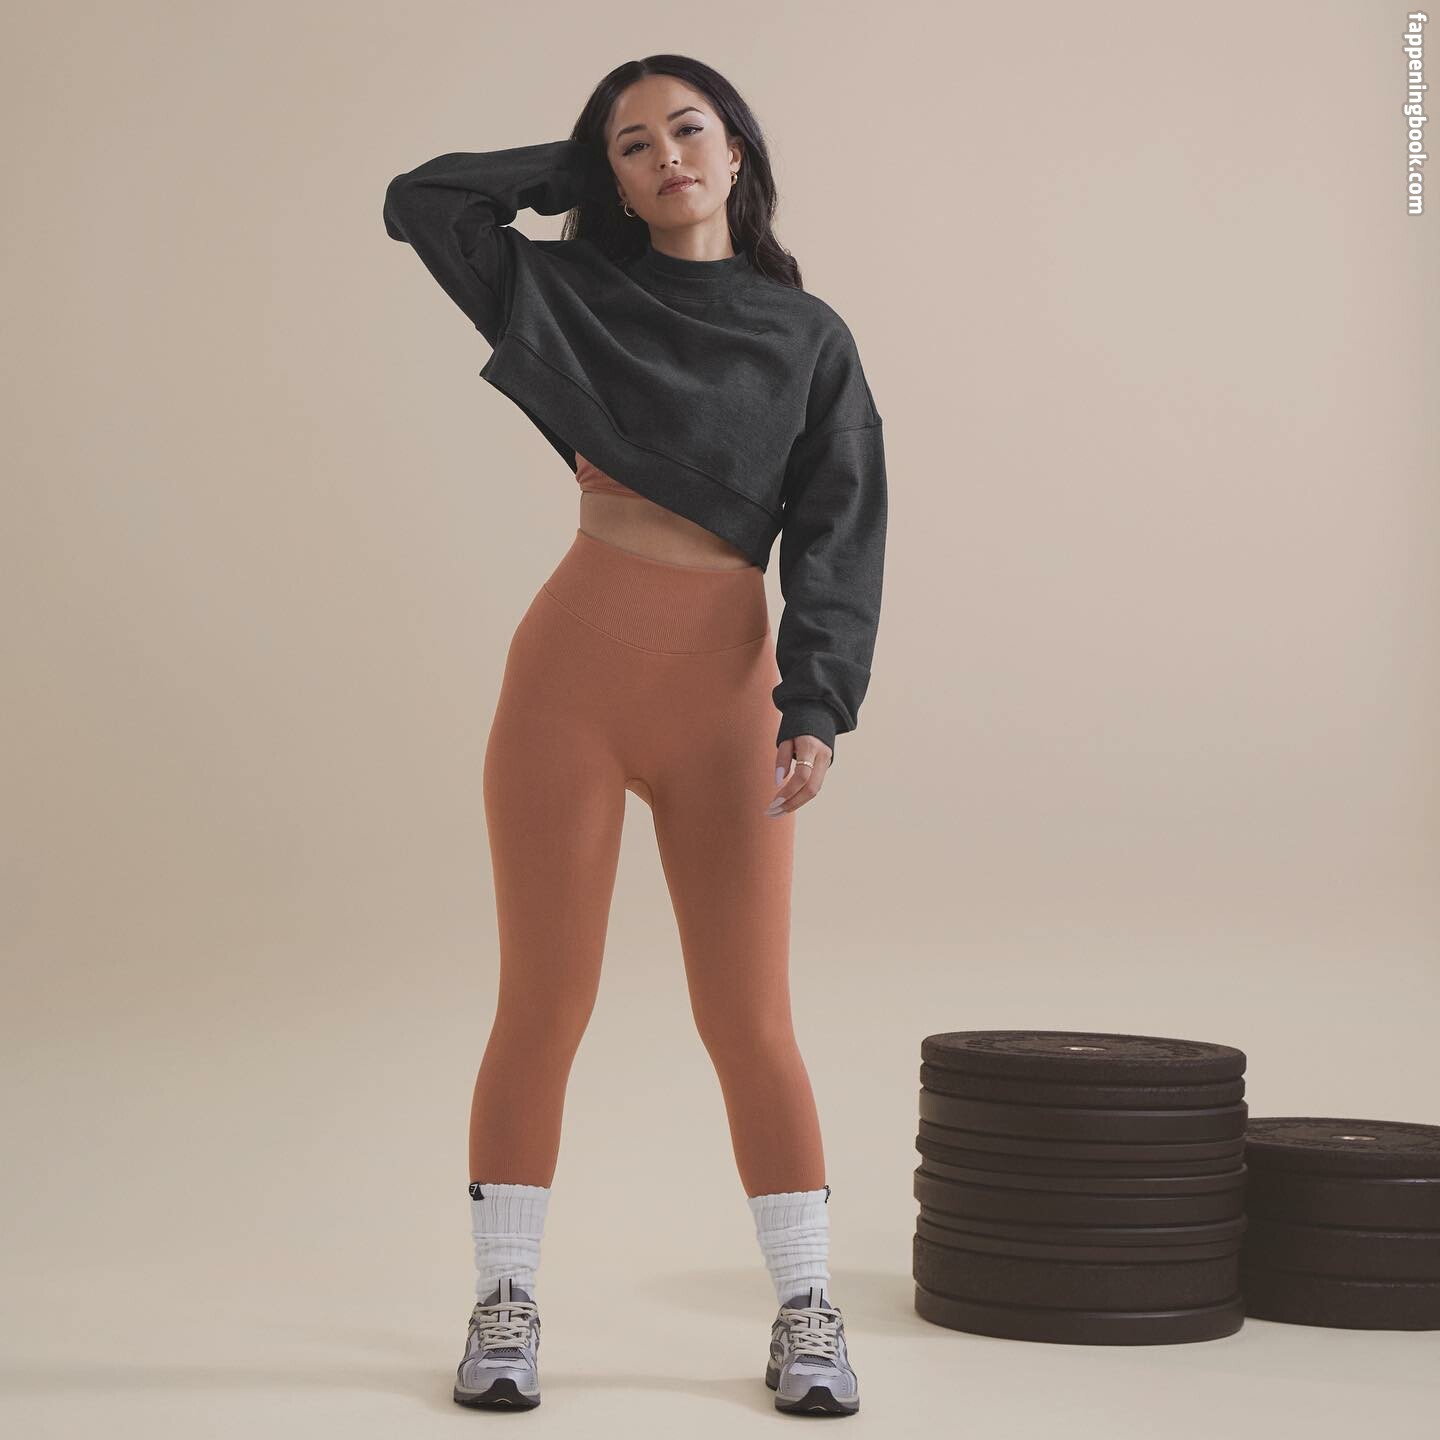 Valkyrae Valkyrae Nude Onlyfans Leaks The Fappening Photo